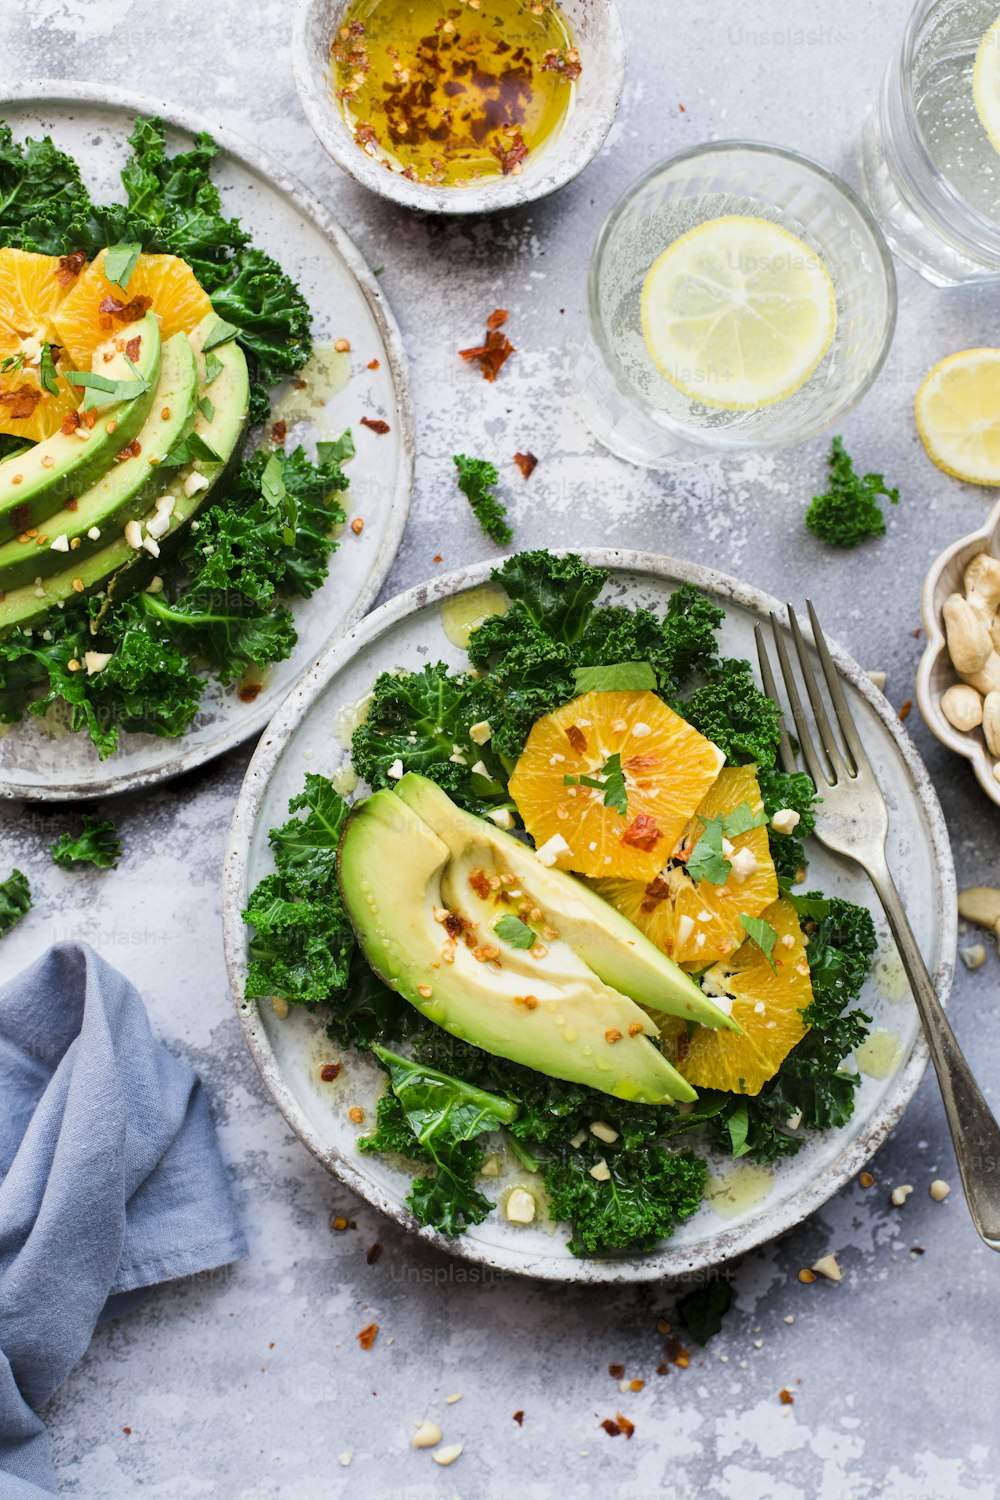 two plates of food with avocado, oranges and nuts